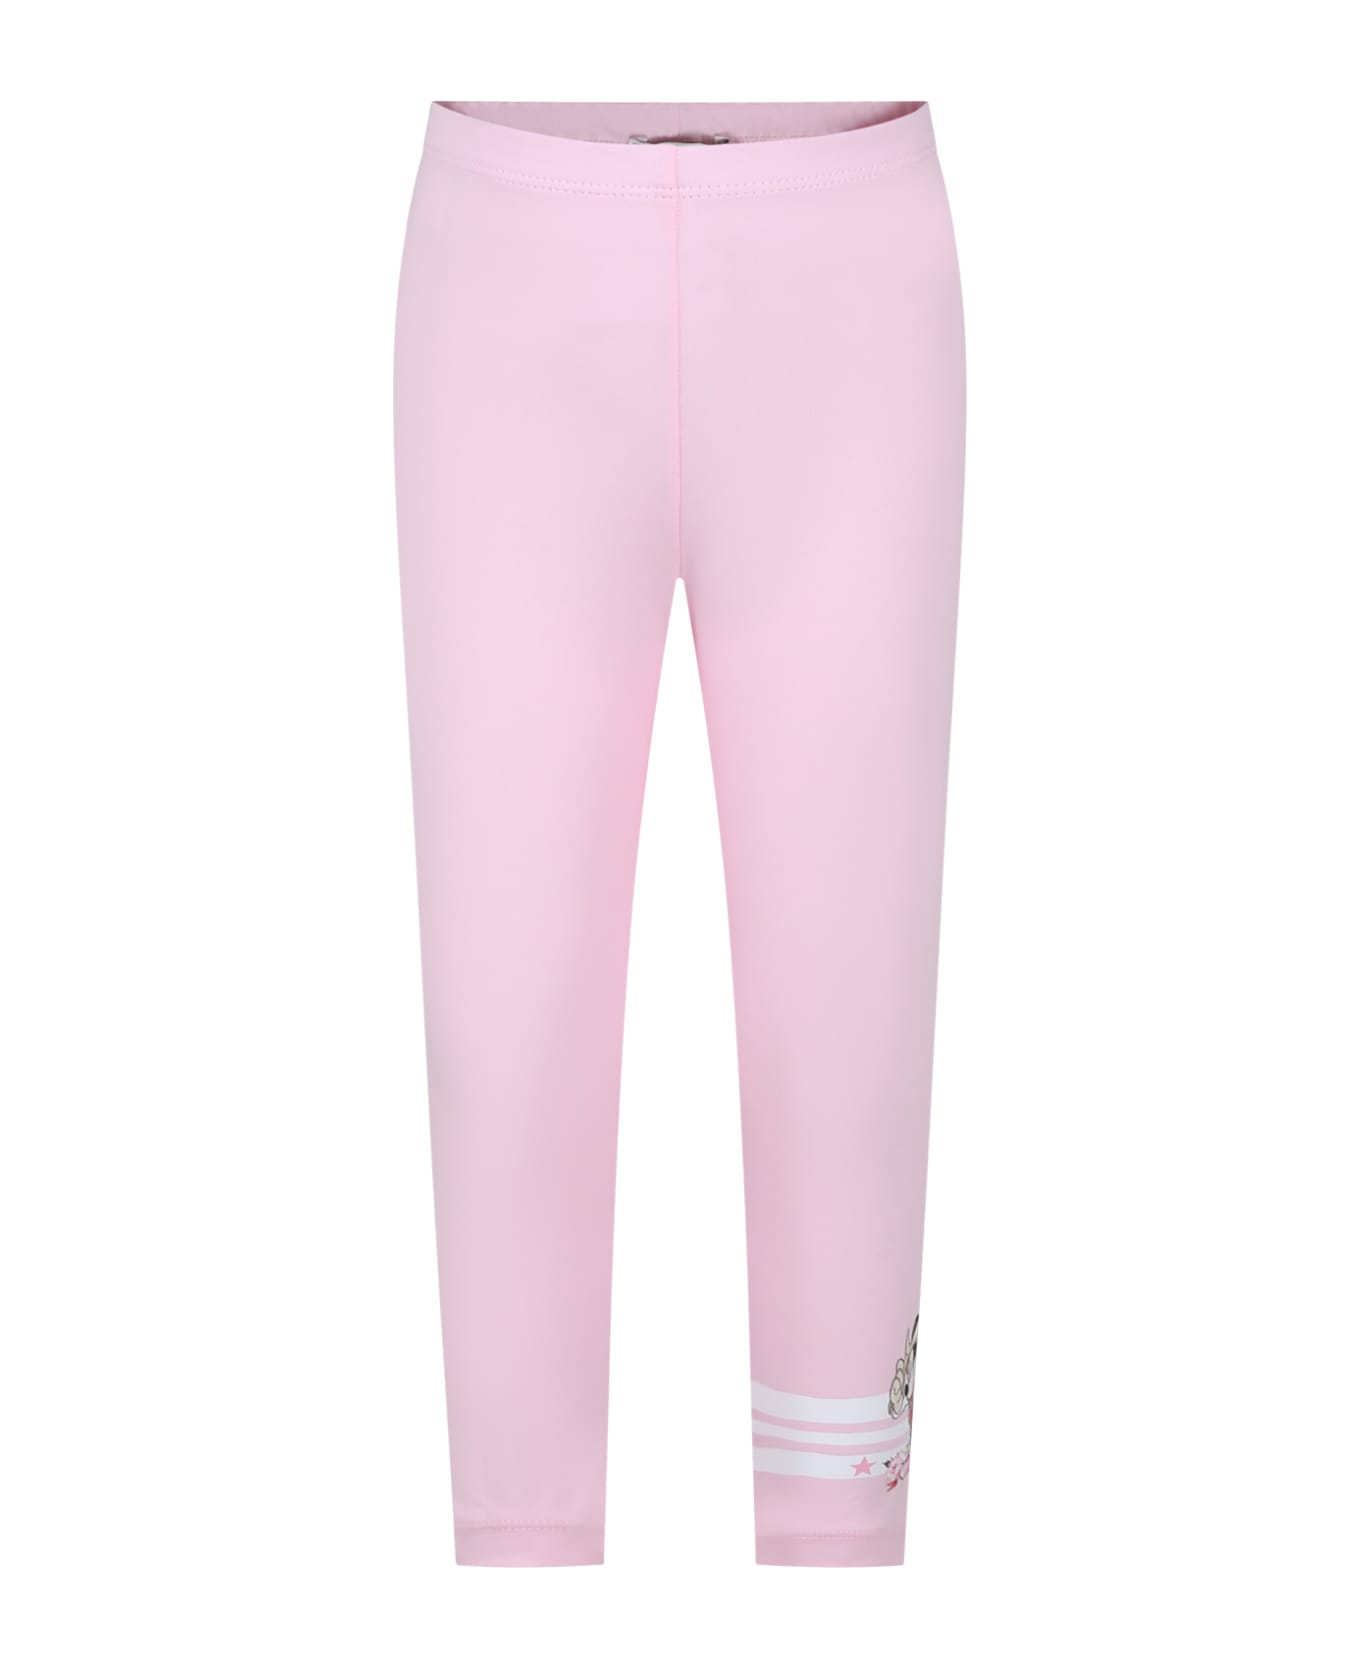 Monnalisa Pink Leggings For Girl With Minnie - Rosa ボトムス